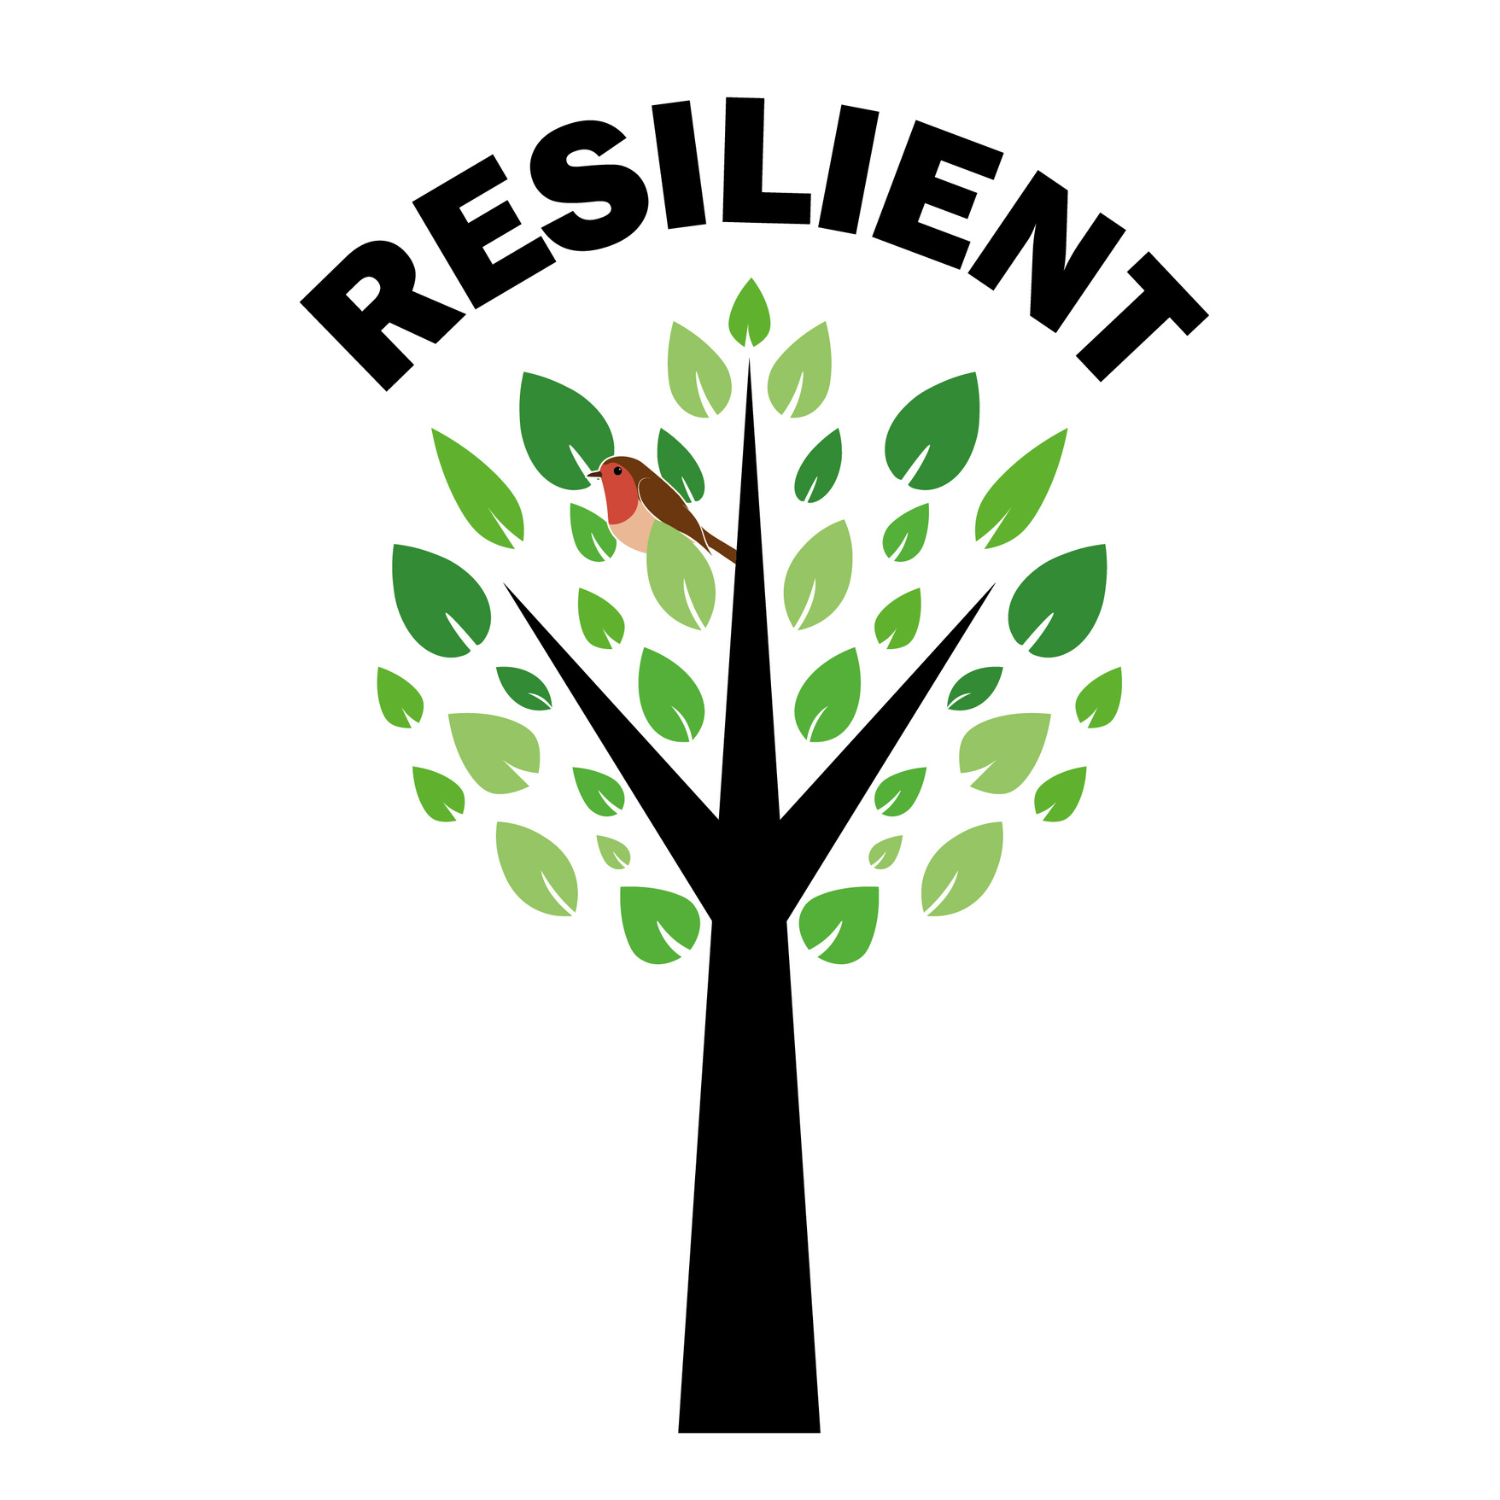 Resilient NW logo